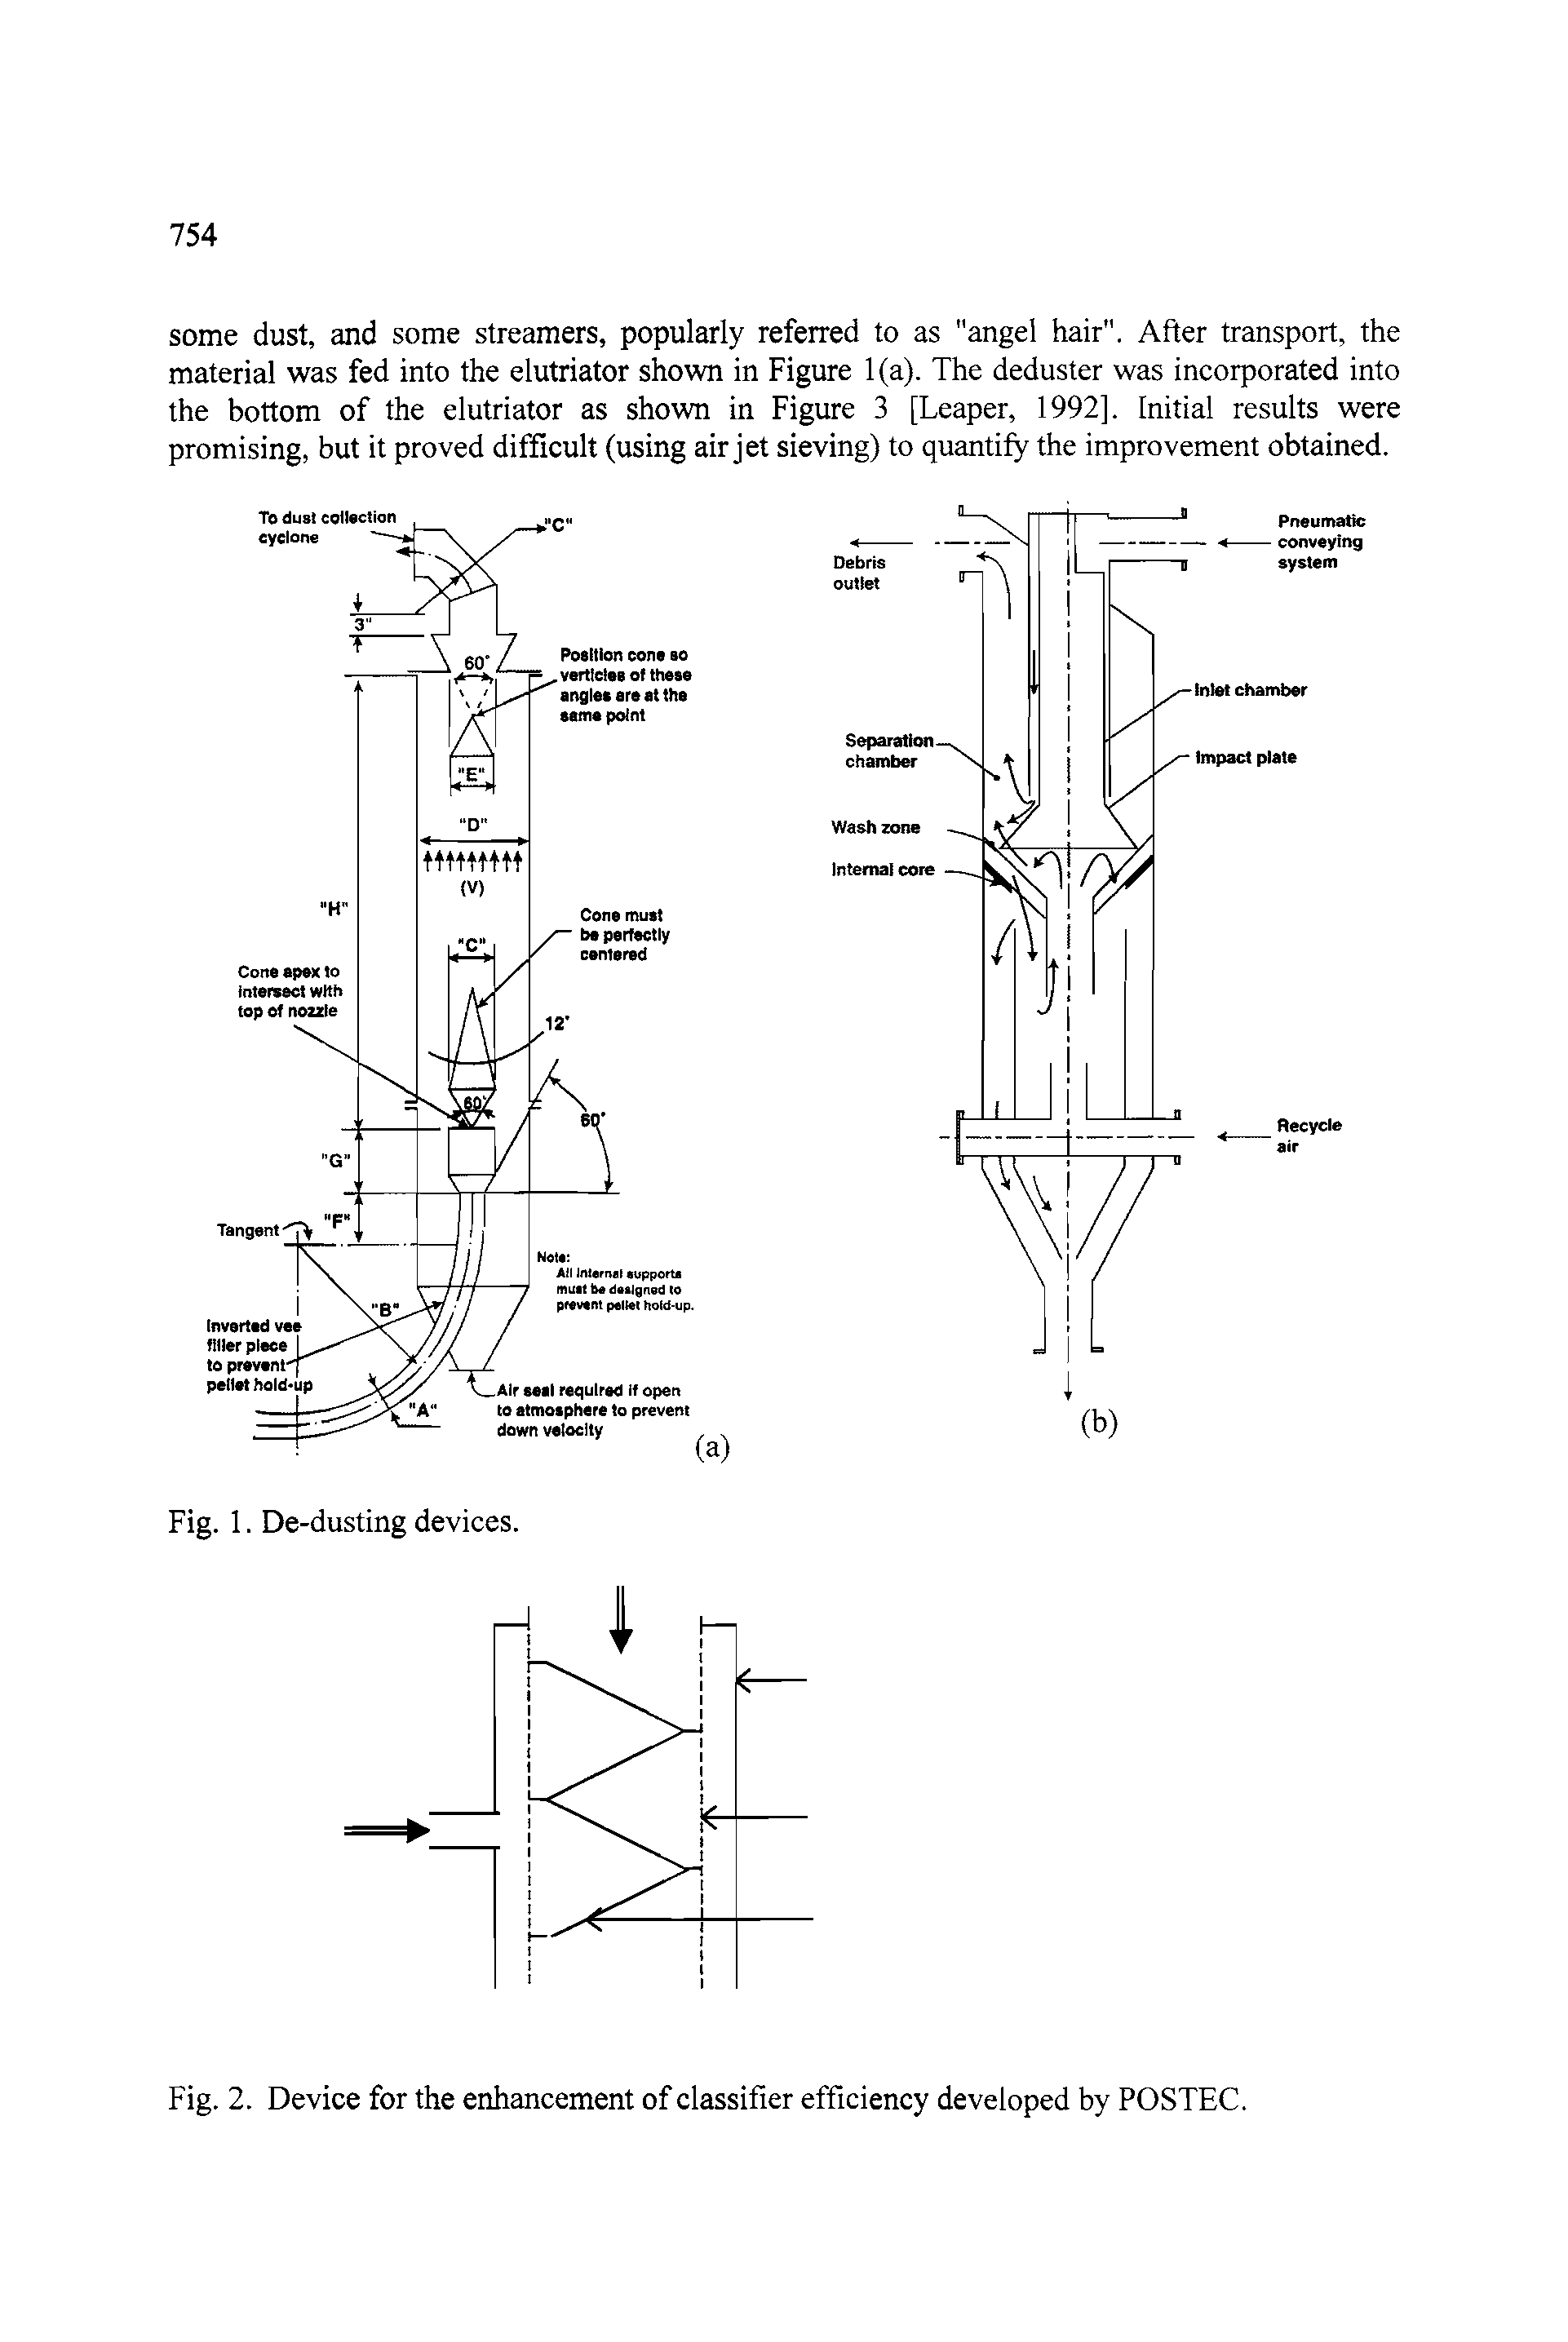 Fig. 2. Device for the enhancement of classifier efficiency developed by POSTEC.